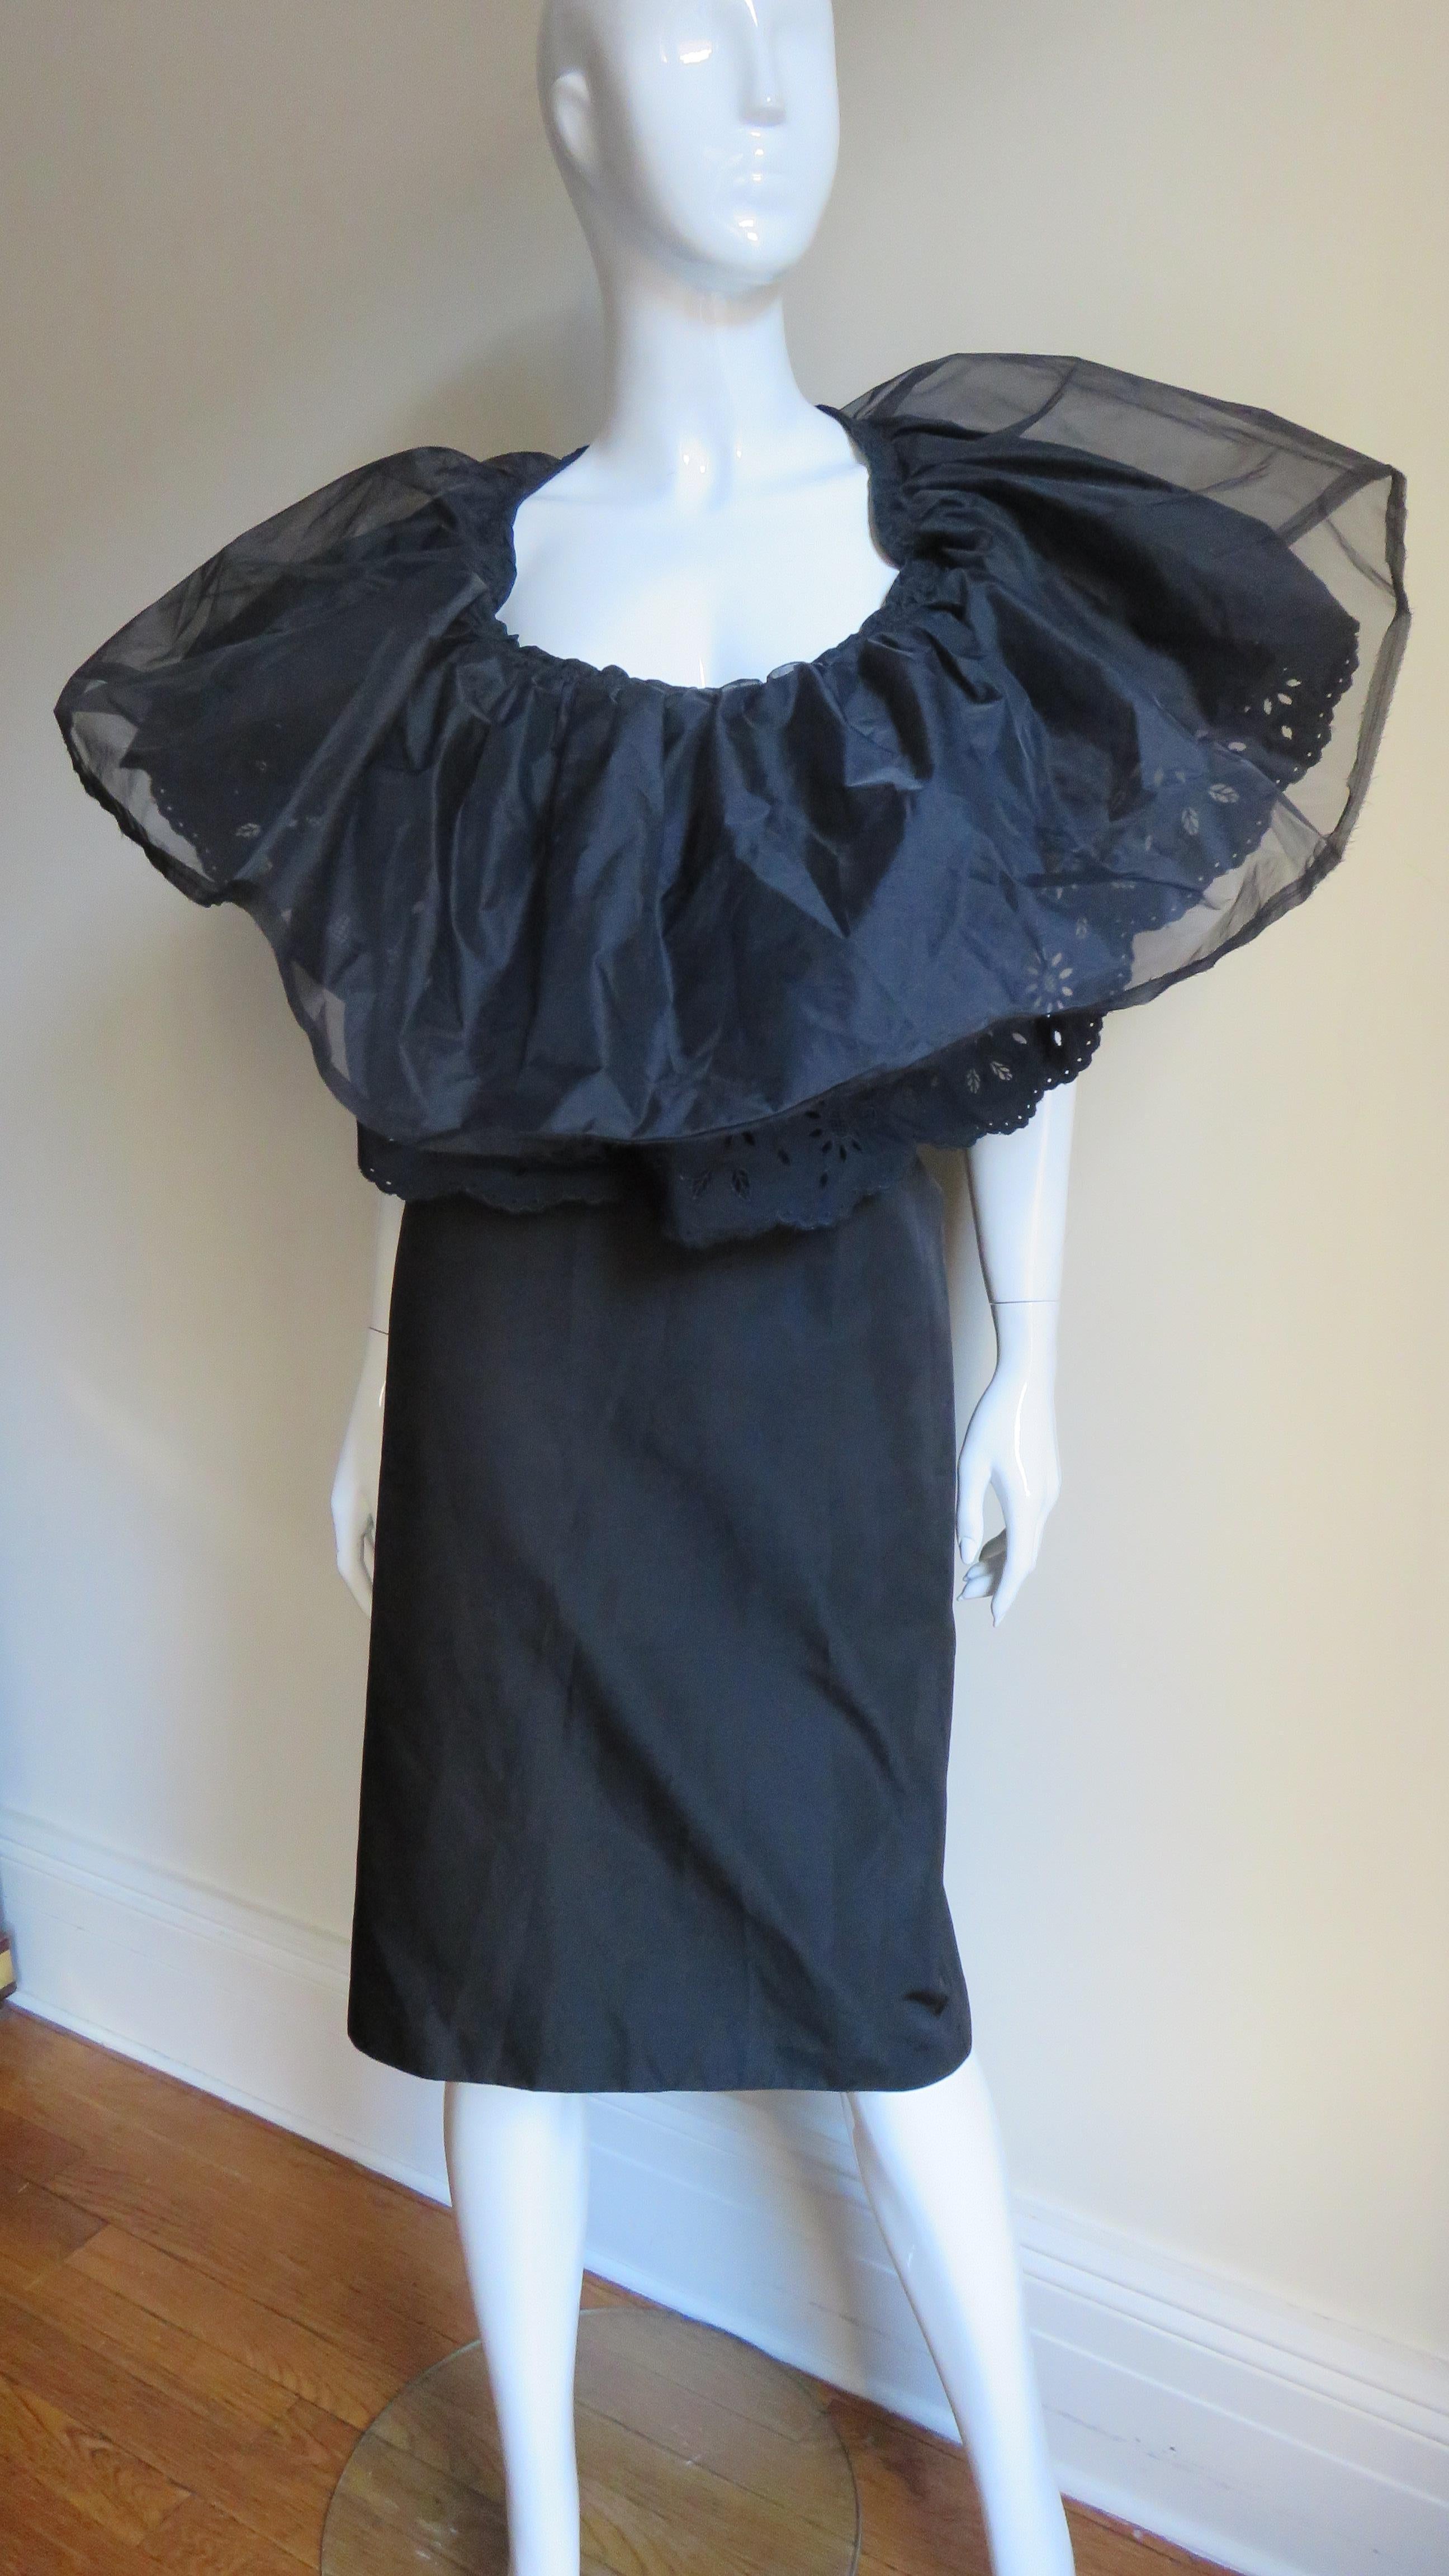 A fabulous black sheath dress with a large collar from the Comme des Garcons AD 2001, CDG collection.  The front has a deep scooped neckline with a large double ruffle collar- the top layer organza and underneath is eyelet lace.  The dress has a